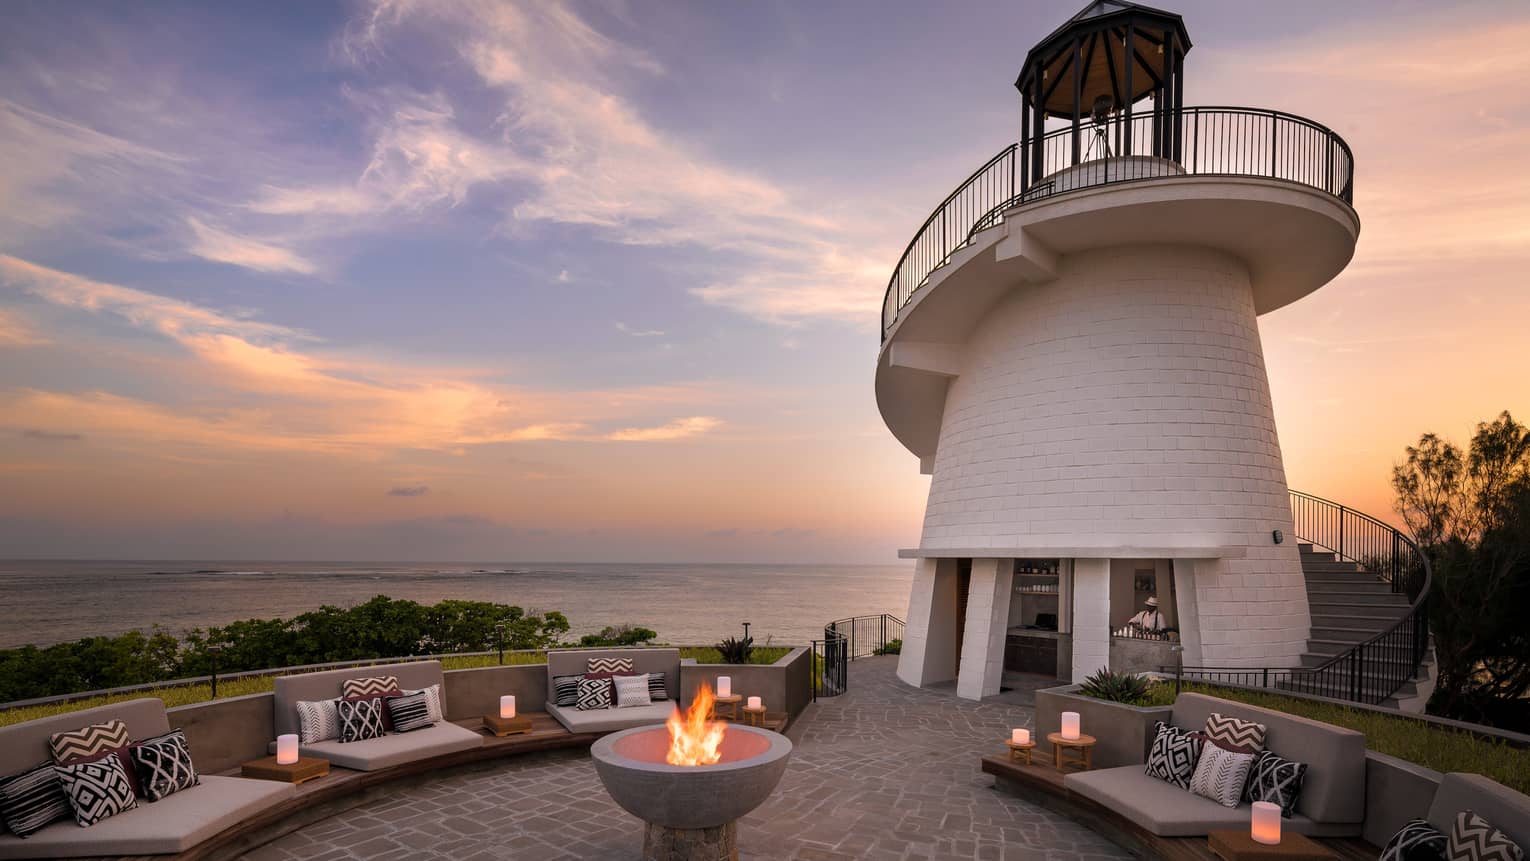 Lighthouse Restaurant illuminated at sunset with fire pit and luminaries